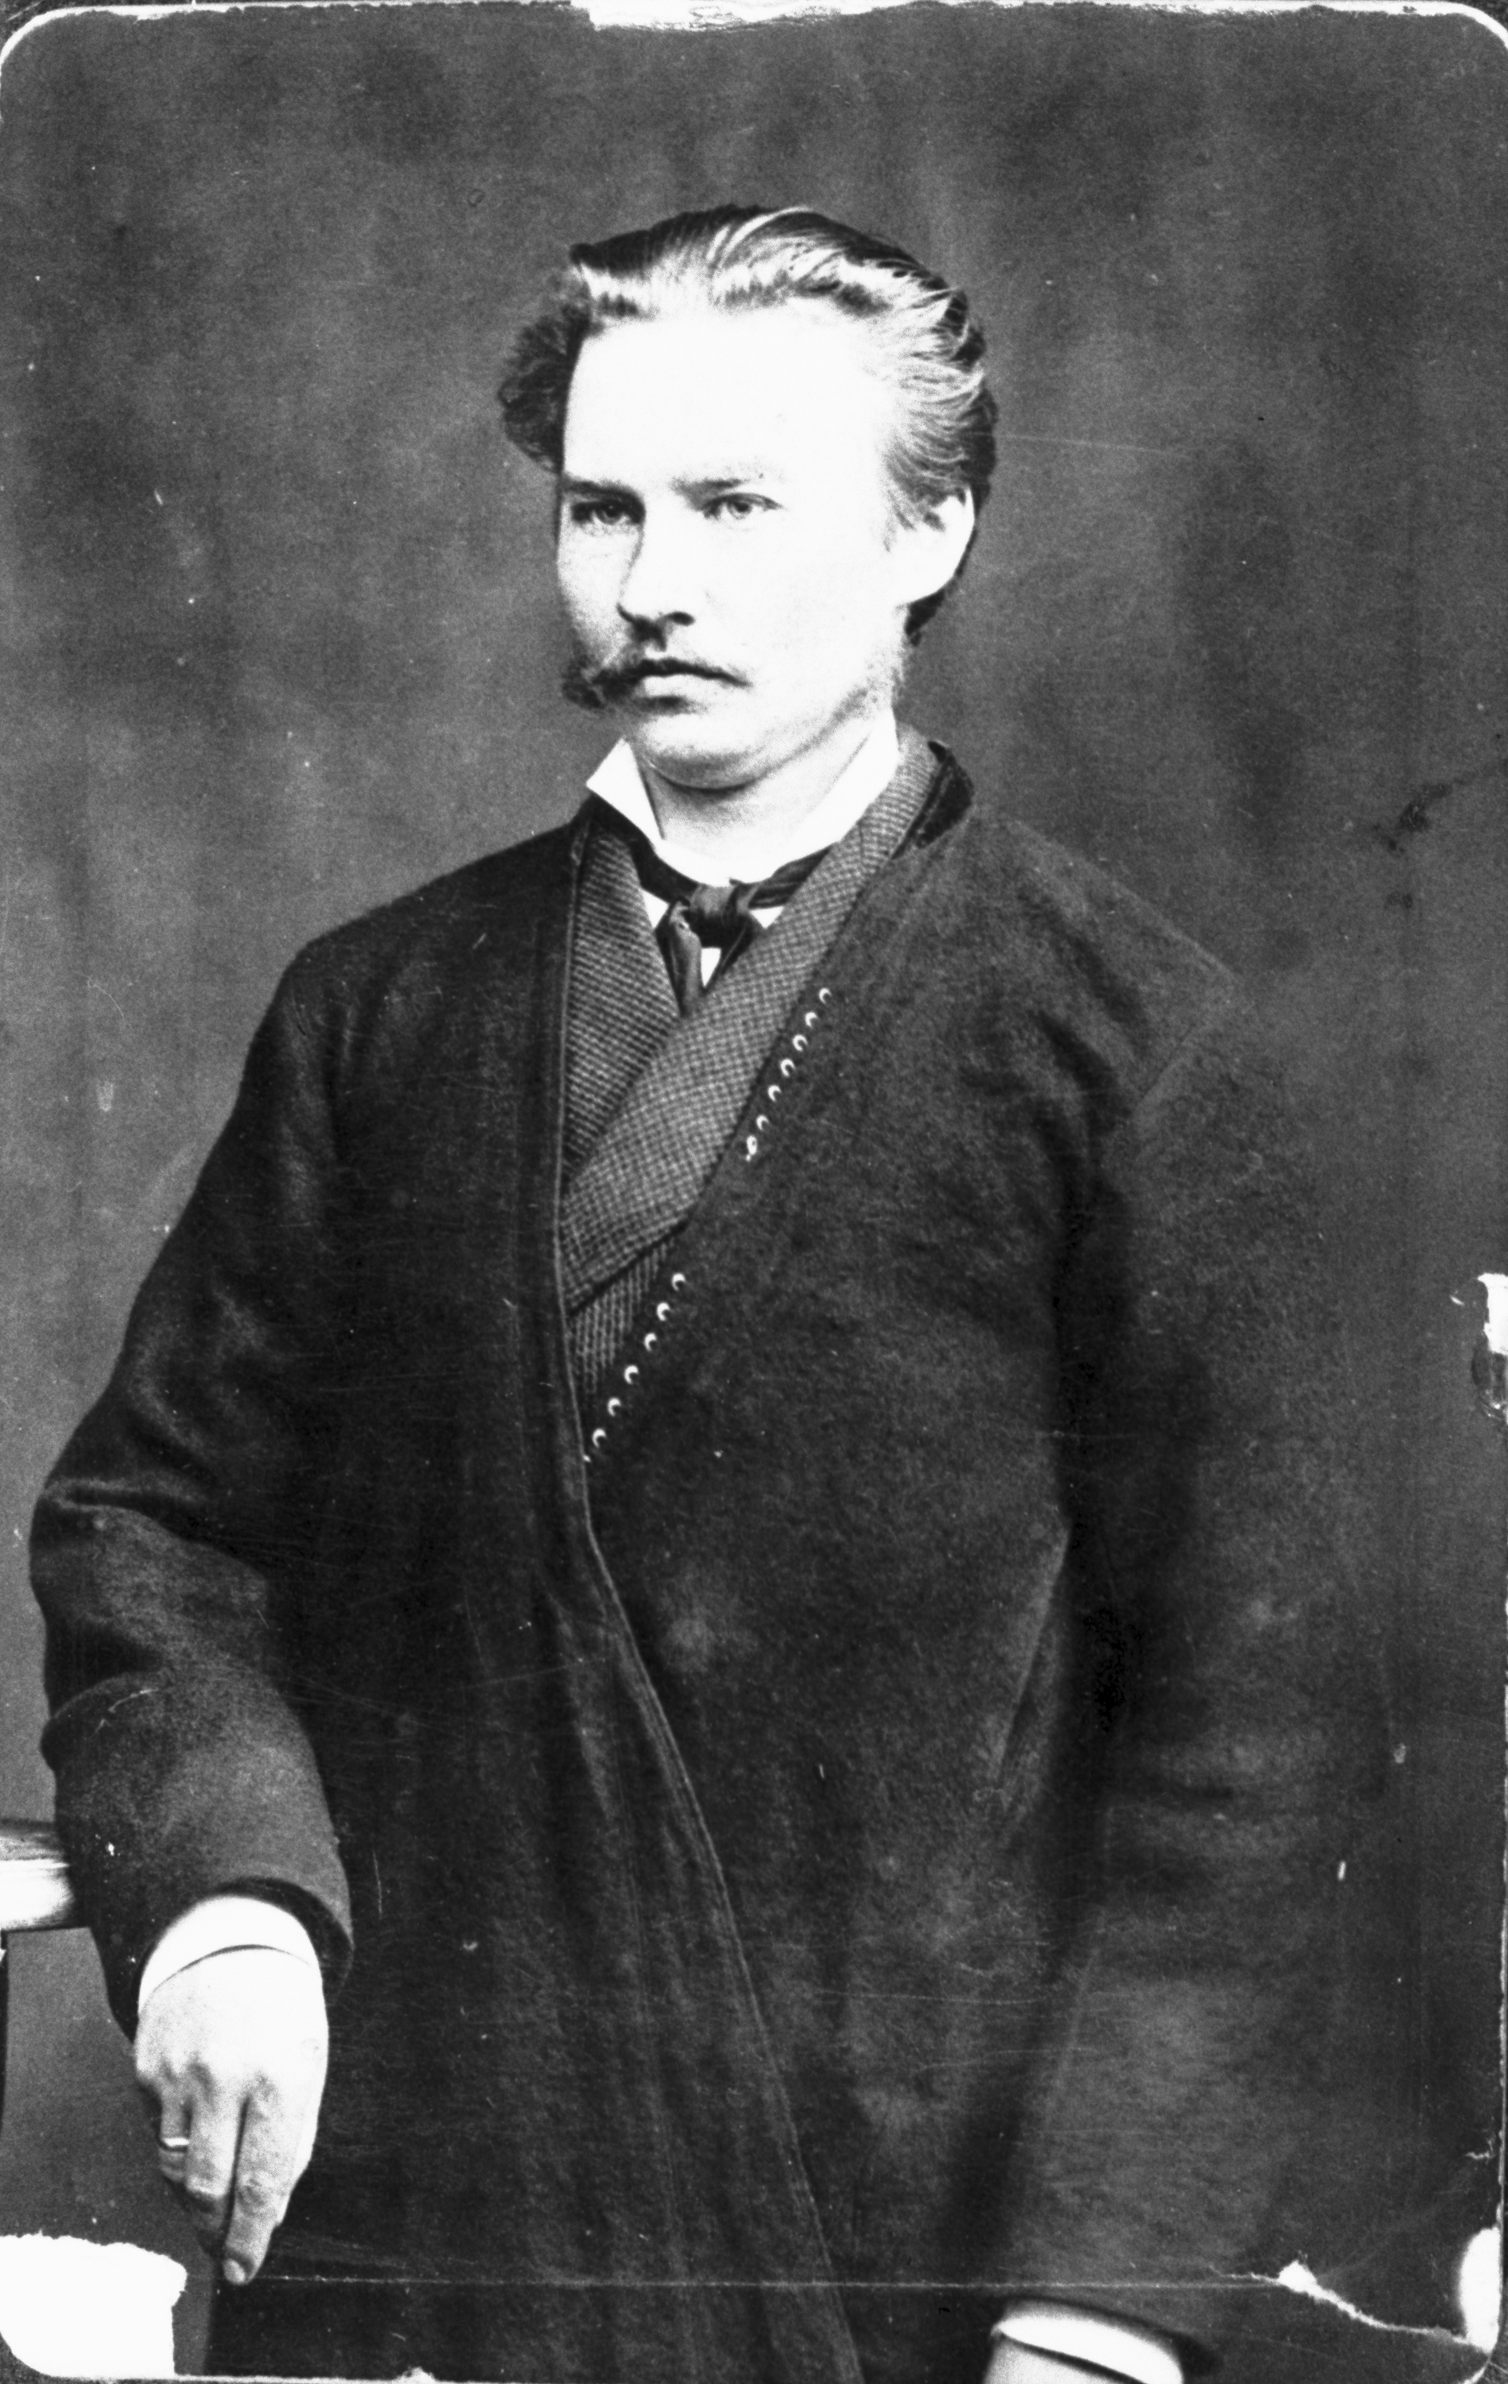 A. Kitzberg in the 1880s